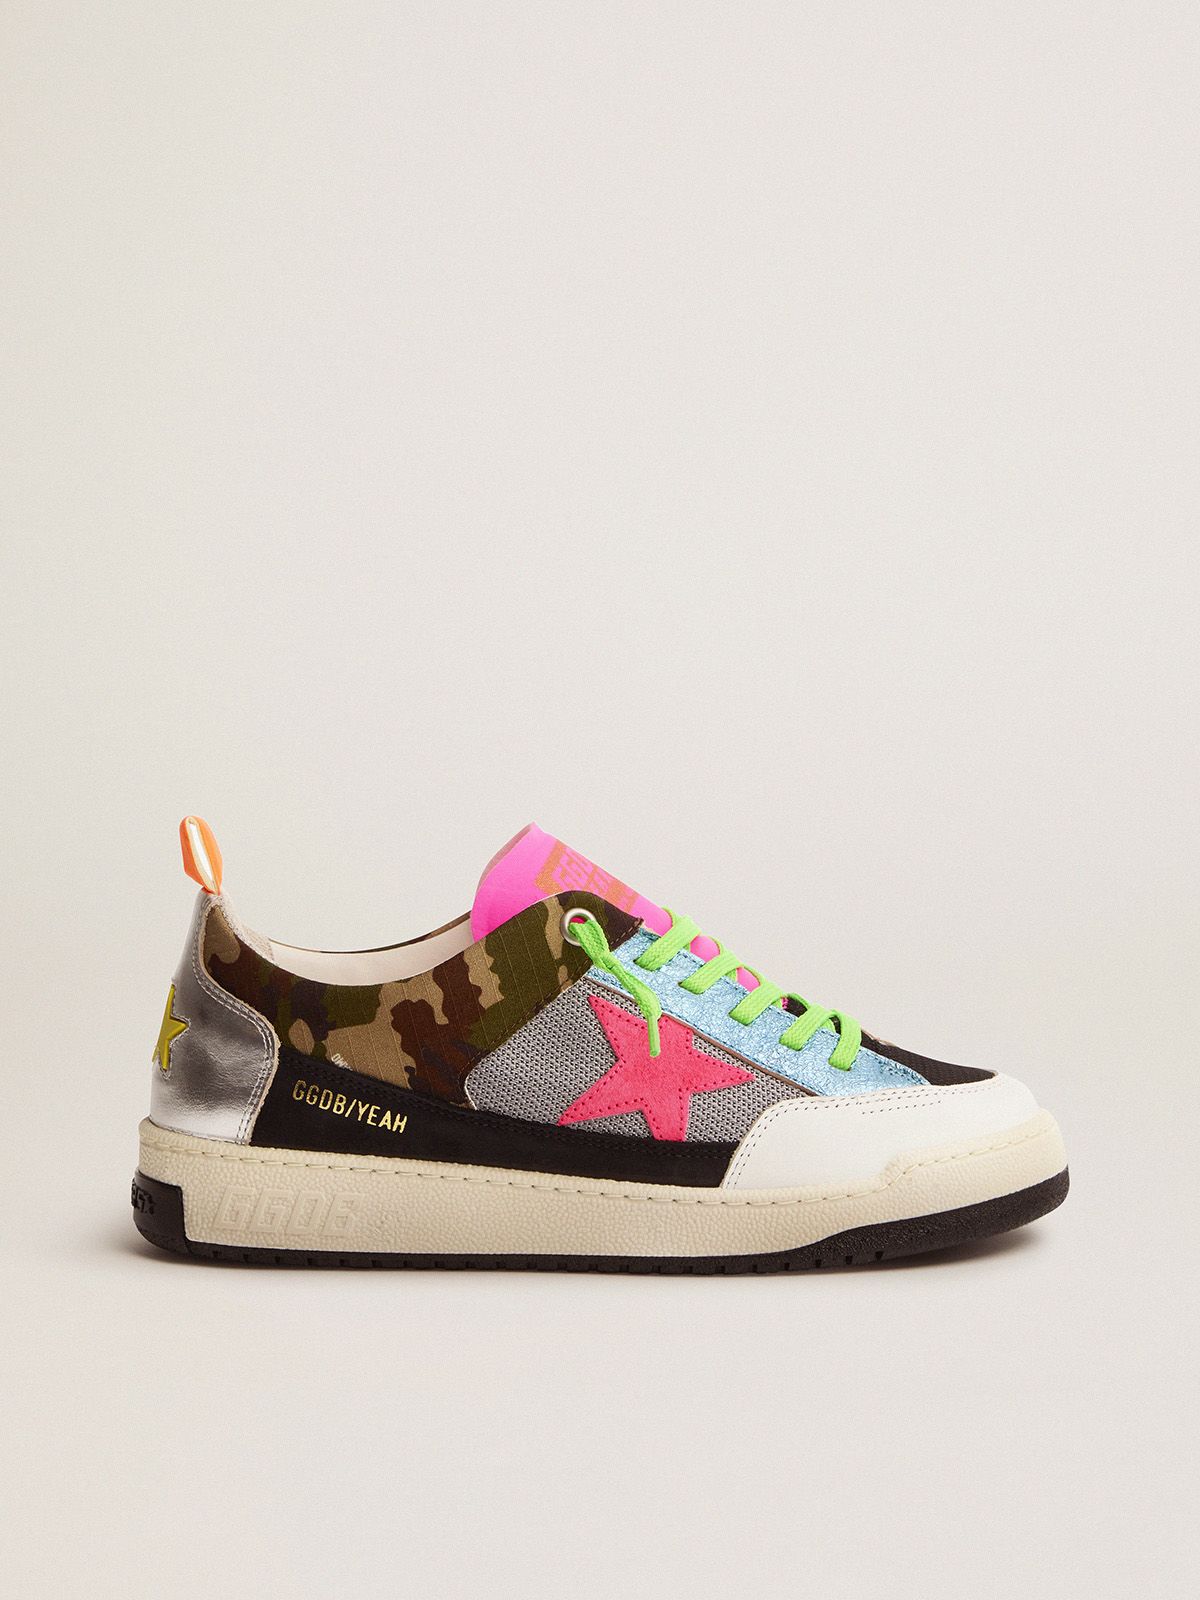 golden goose Yeah star sneakers camouflage with fuchsia Women’s